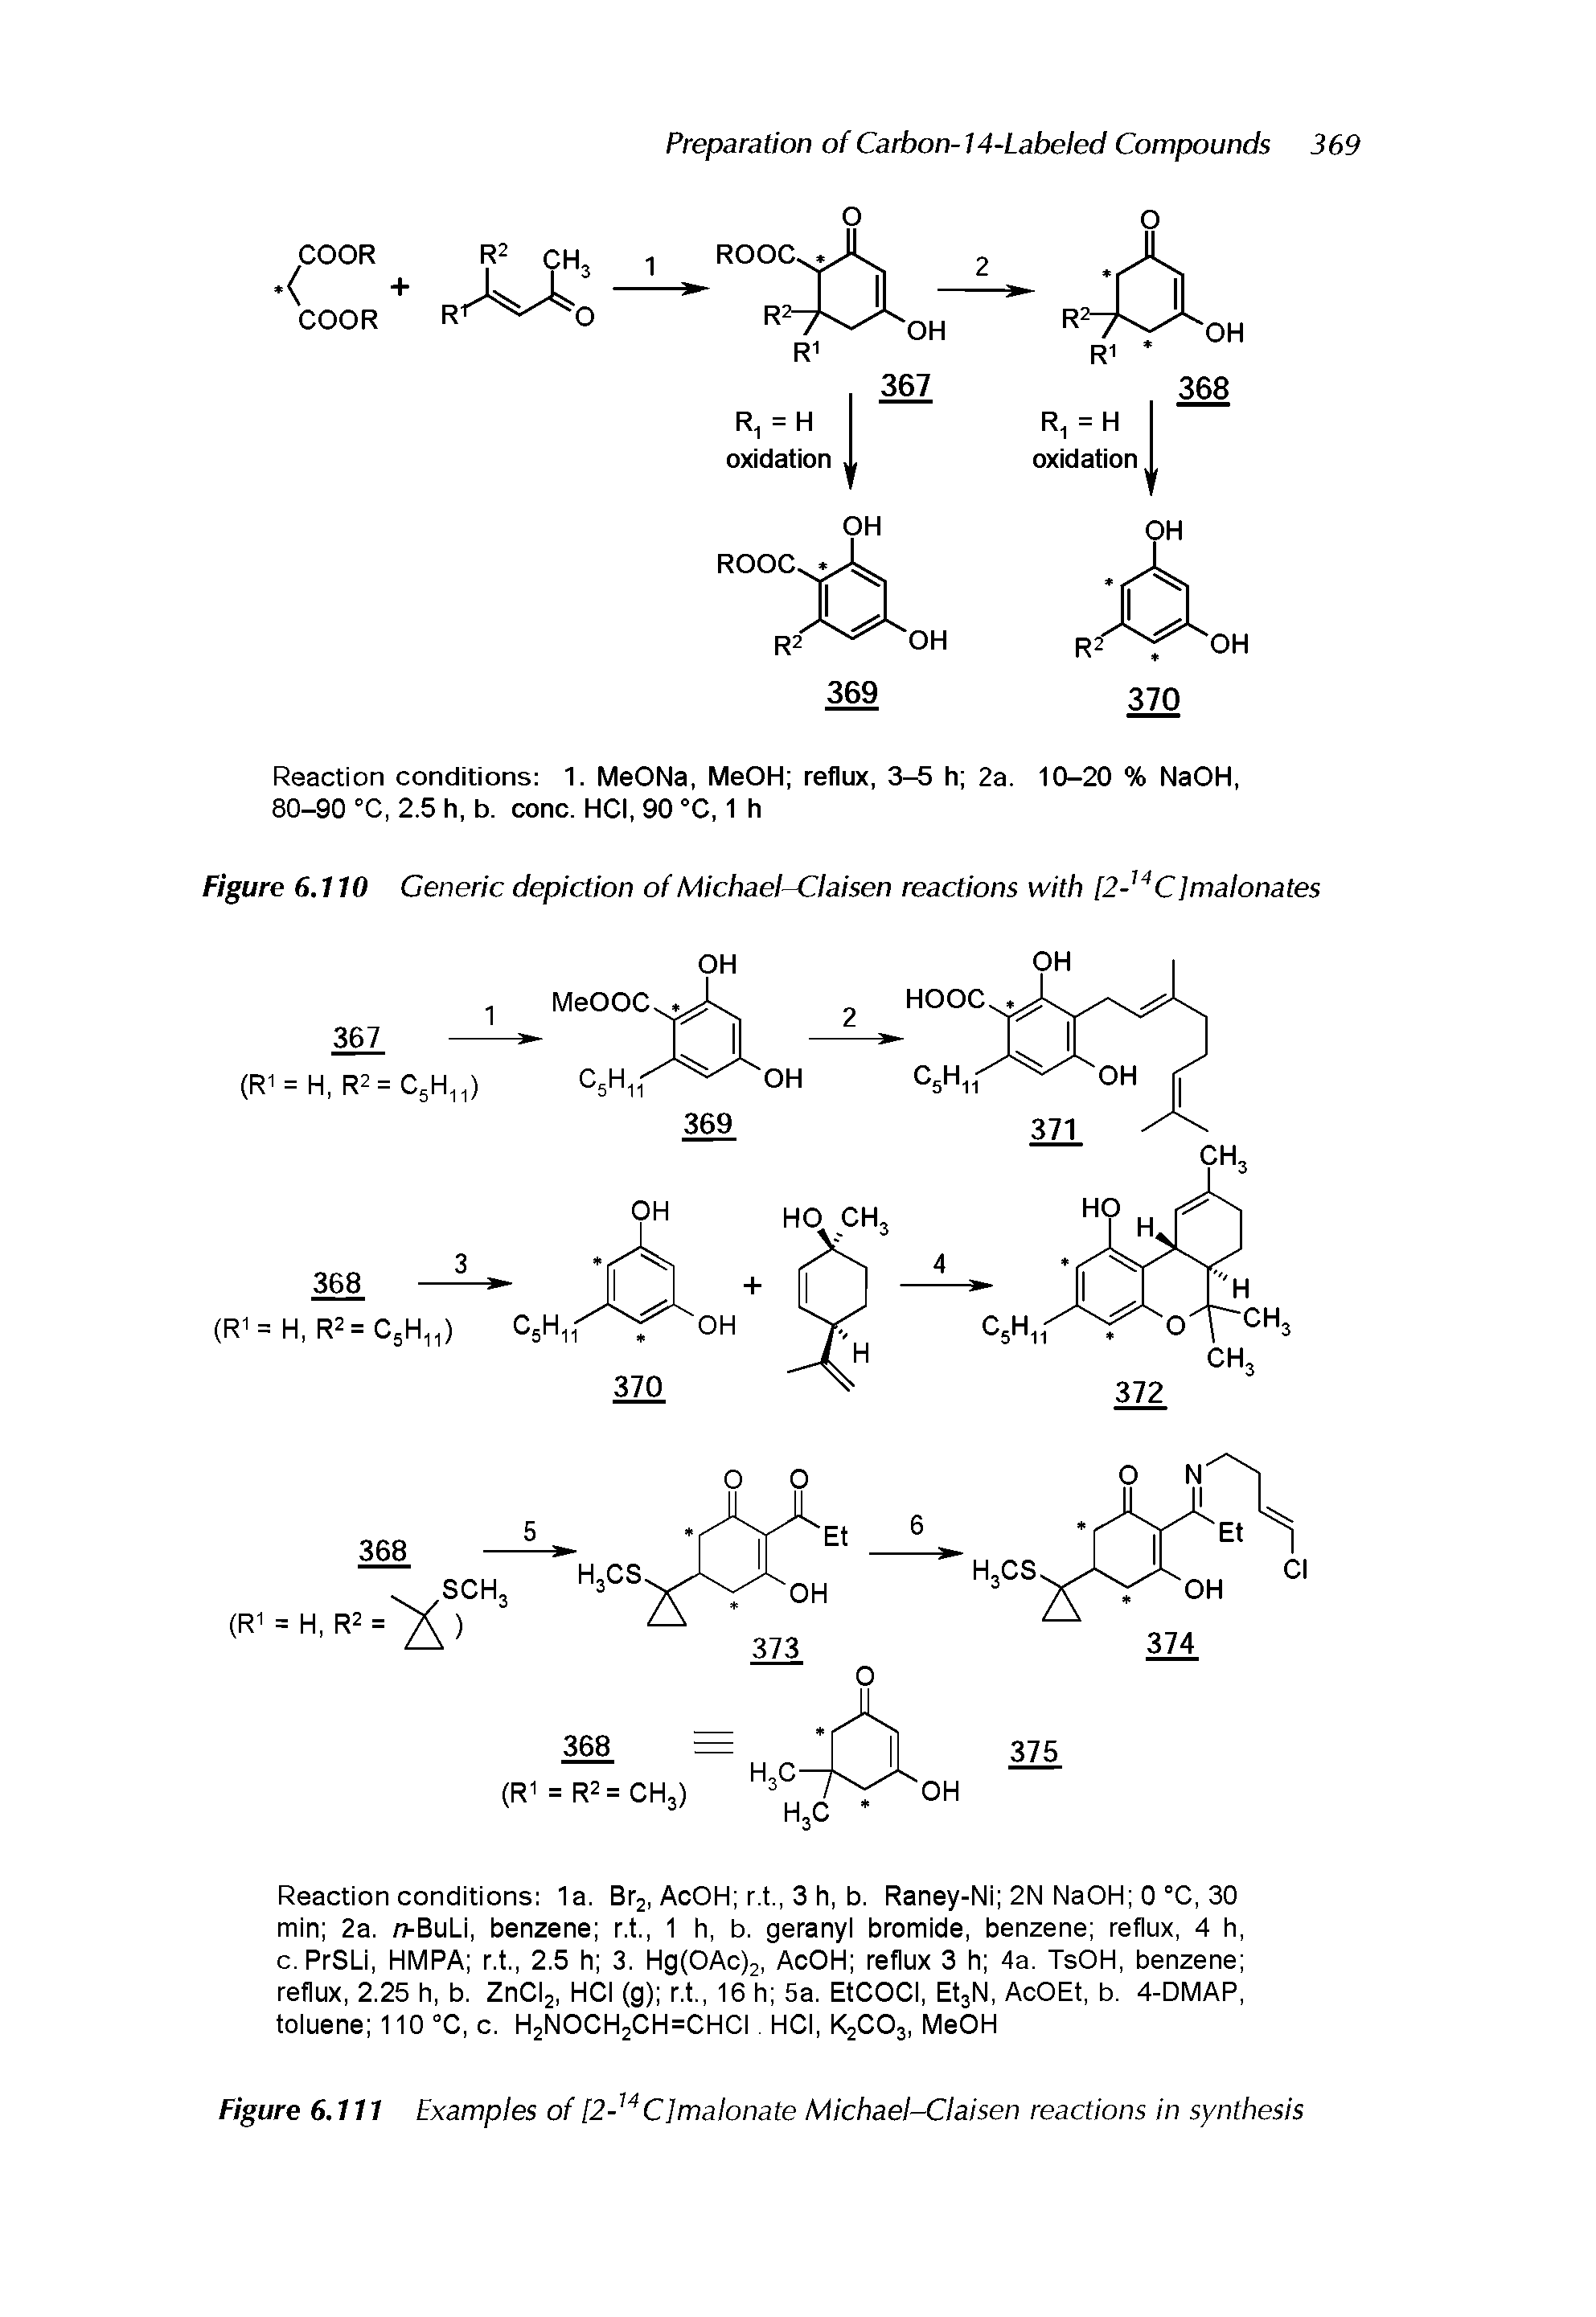 Figure 6.111 Examples of [2- C]malonate Michael-Claisen reactions in synthesis...